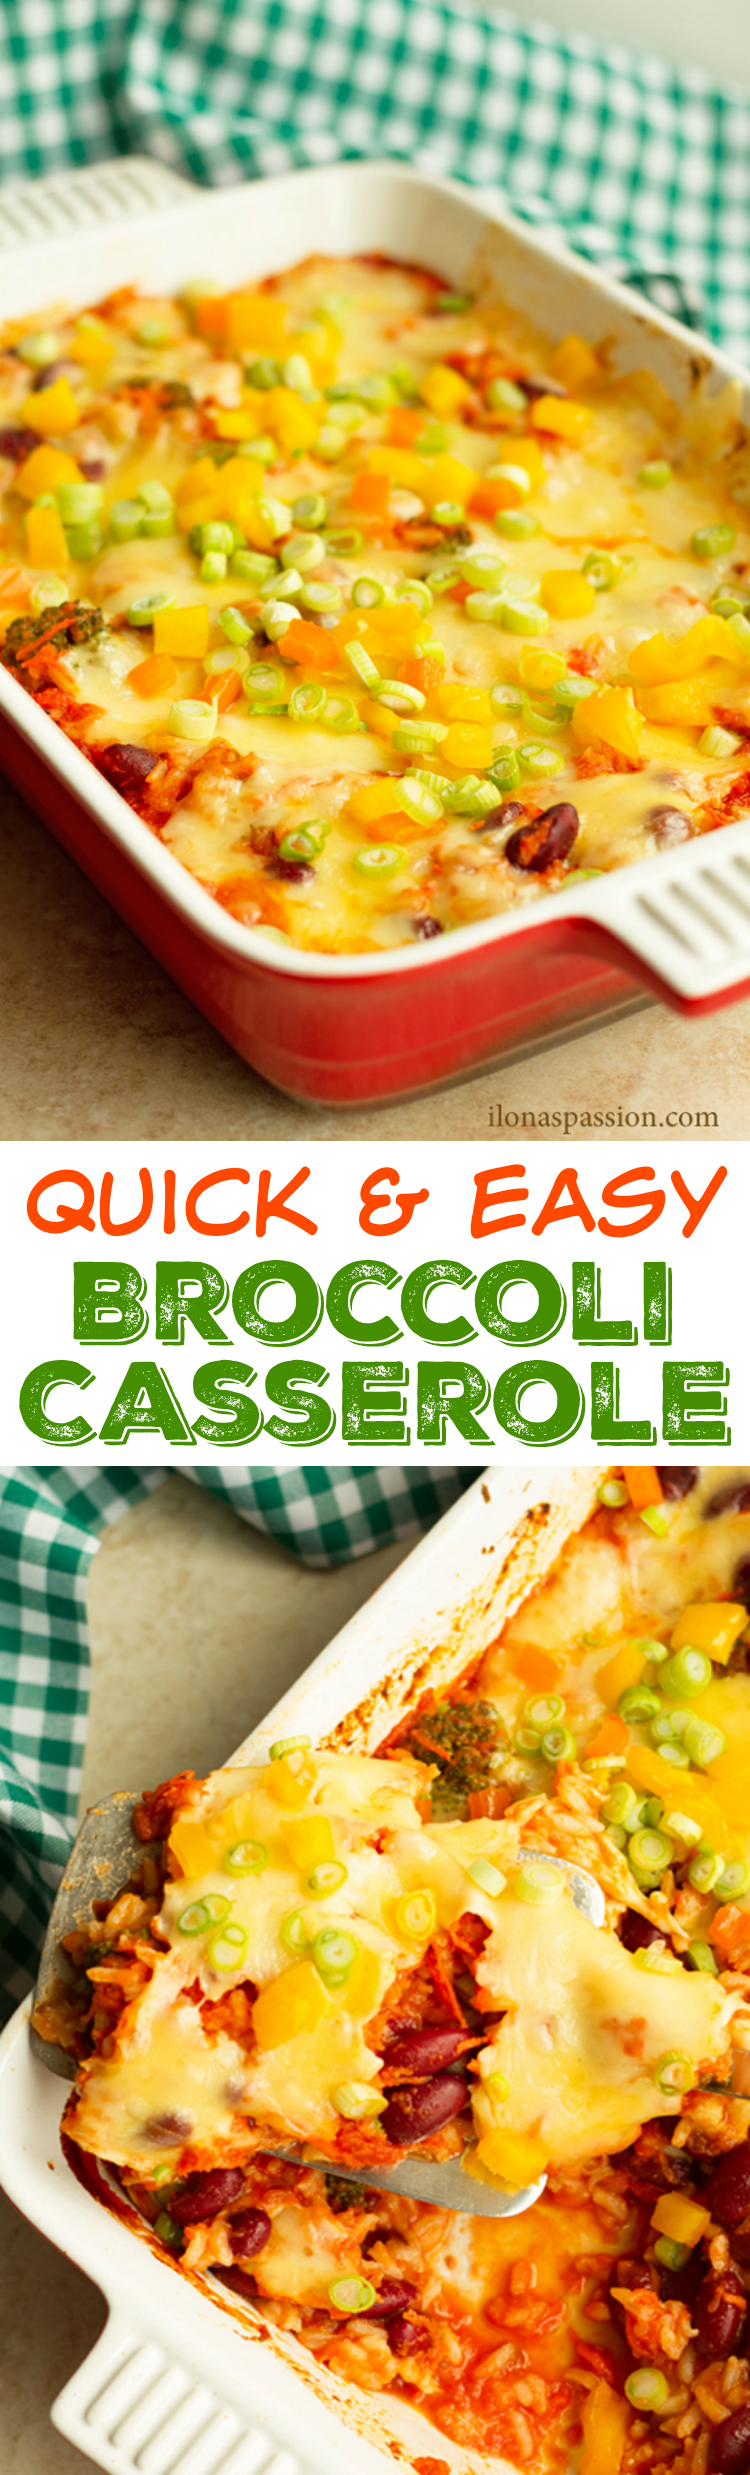 Perfect for weeknight dinner - Easy Broccoli Casserole with kidney beans, cheese and rice. A great meatless dinner idea! I OHMY-CREATIVE.COM